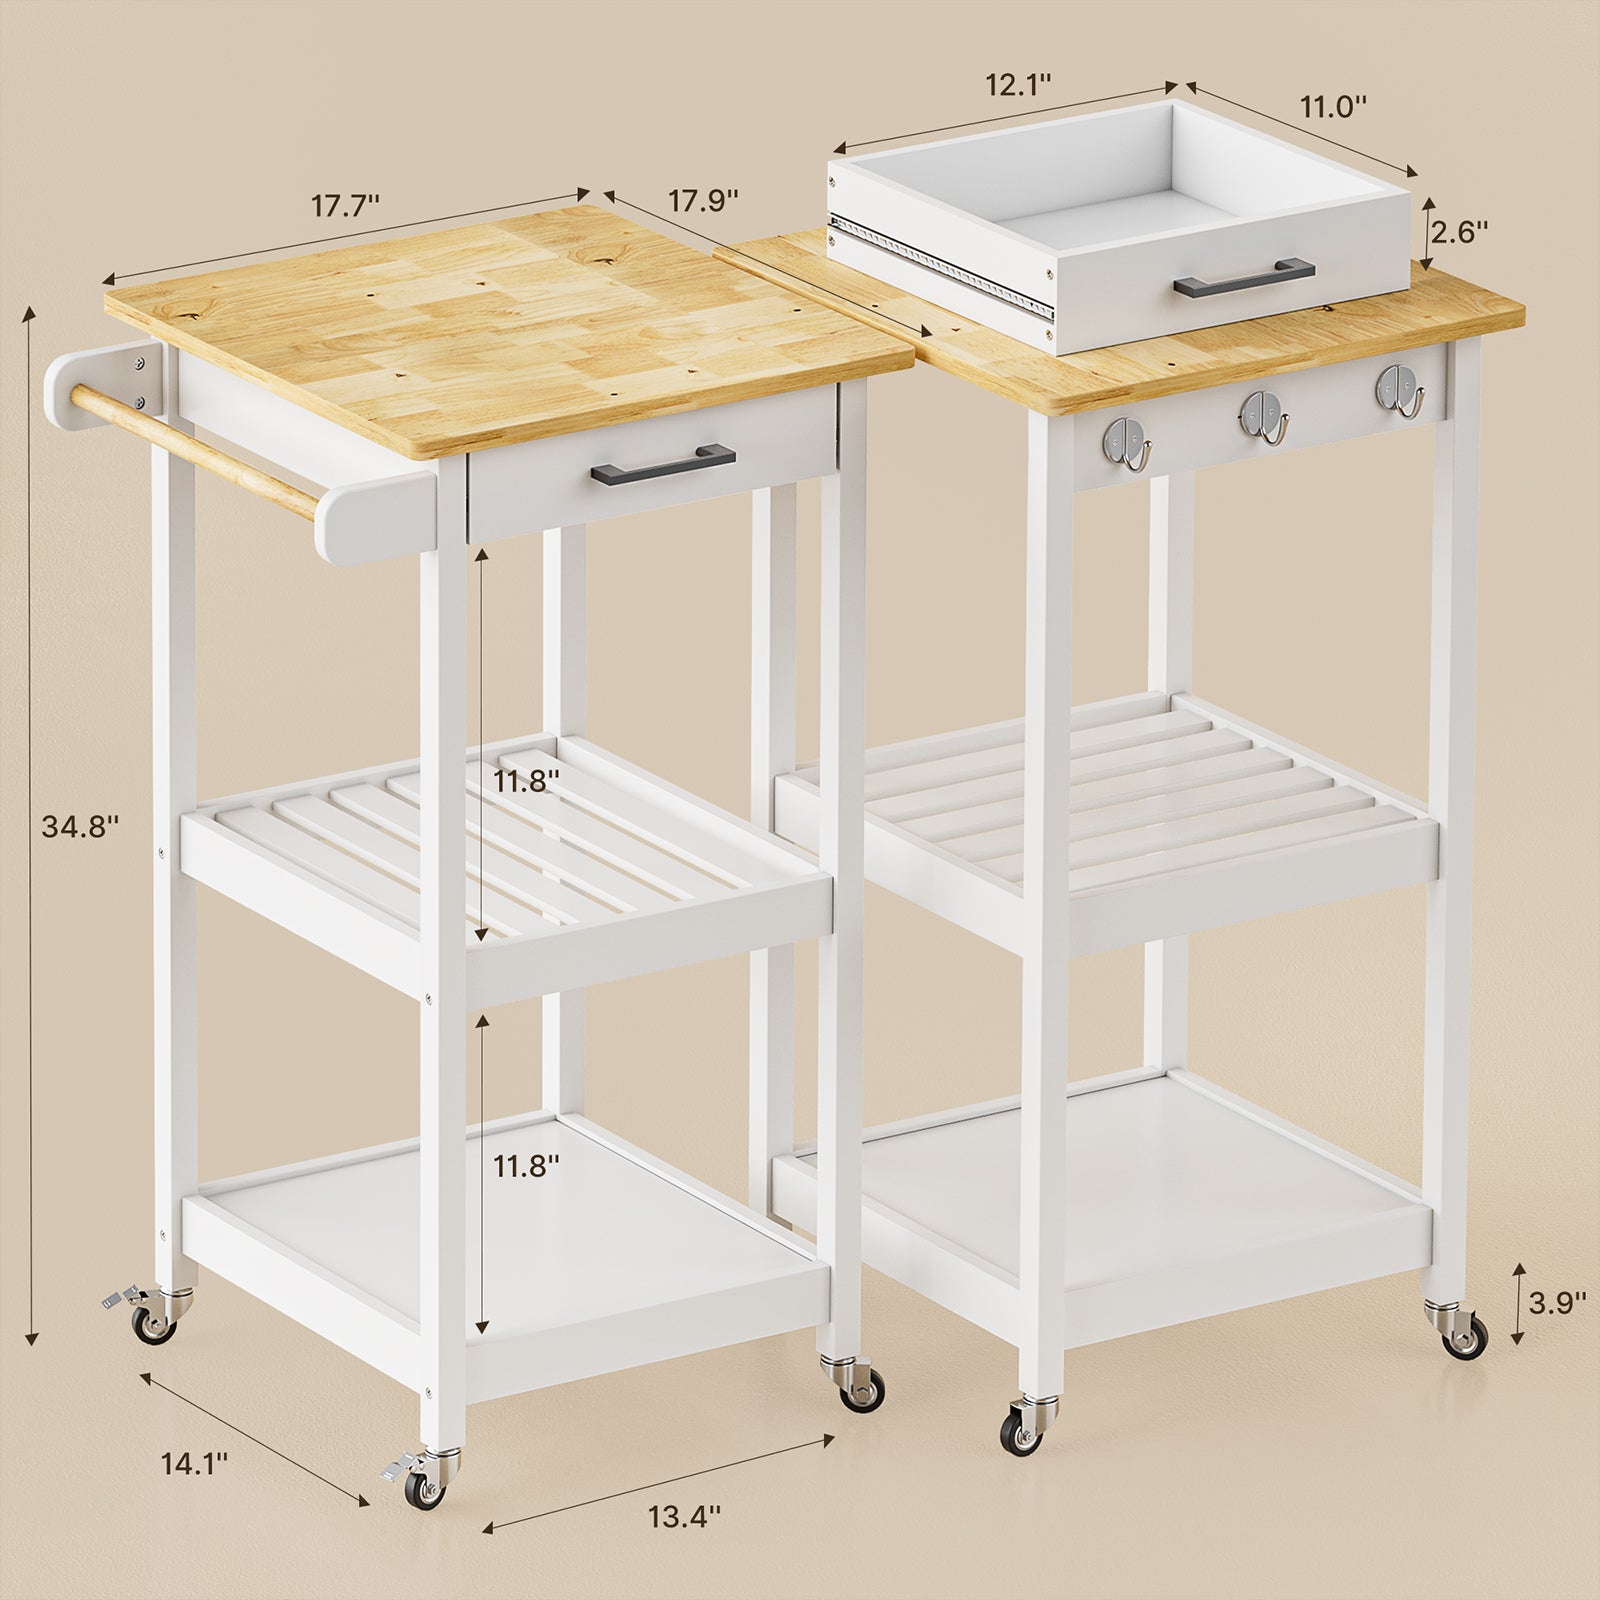 Gizoon KC30 Rolling Small Kitchen Island Cart with Top Drawer and 2 Open Shelf